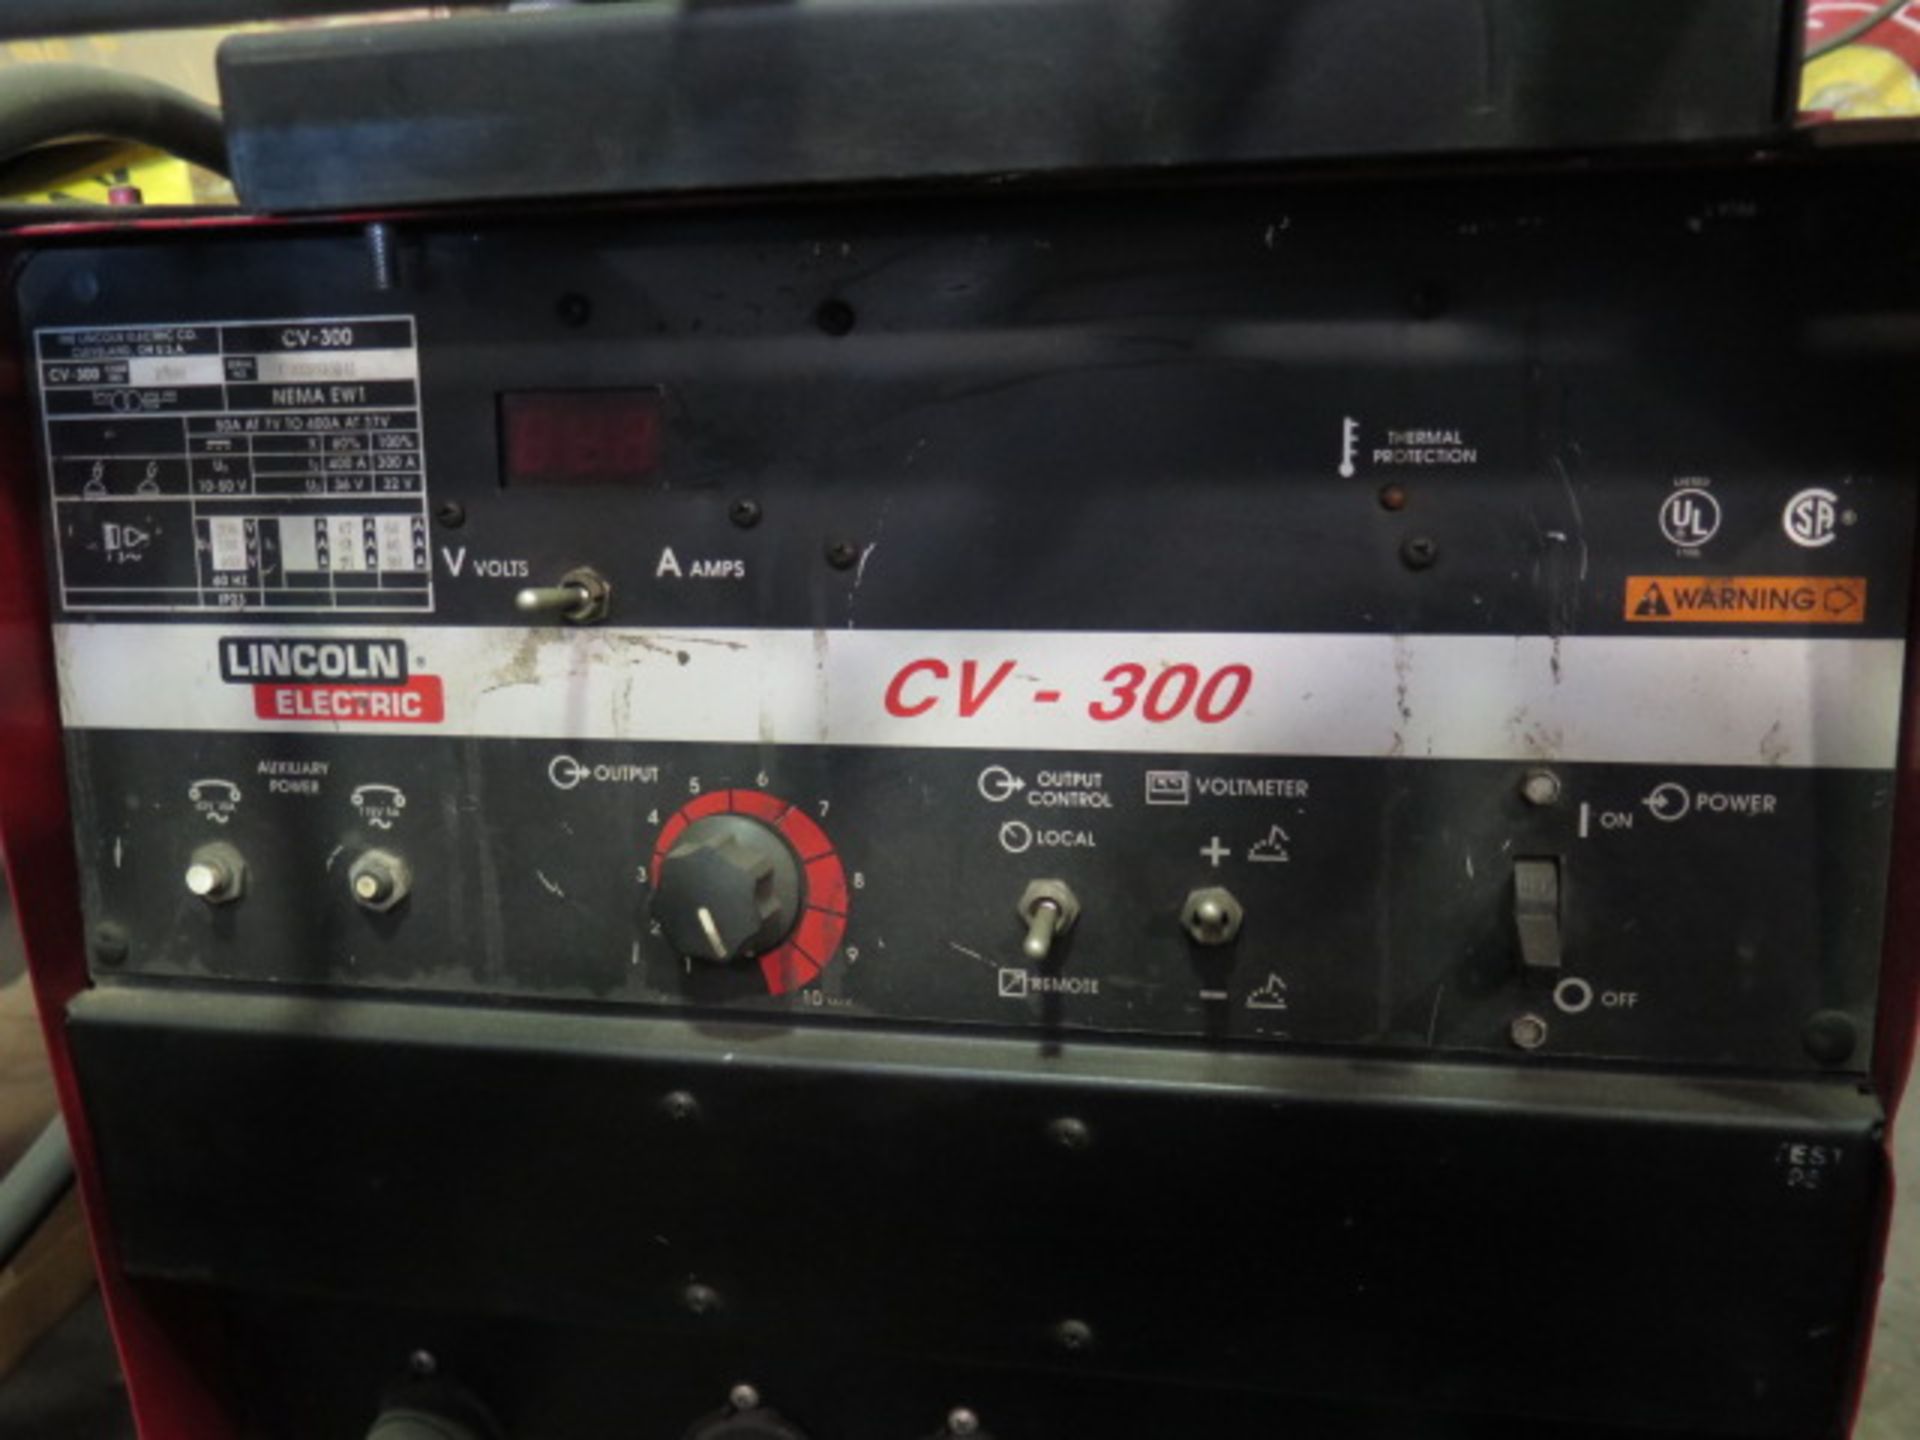 Lincoln CV-300 Arc Welding Power Source w/ Lincoln LN-7 Wire Feed (SOLD AS-IS - NO WARRANTY) - Image 3 of 7